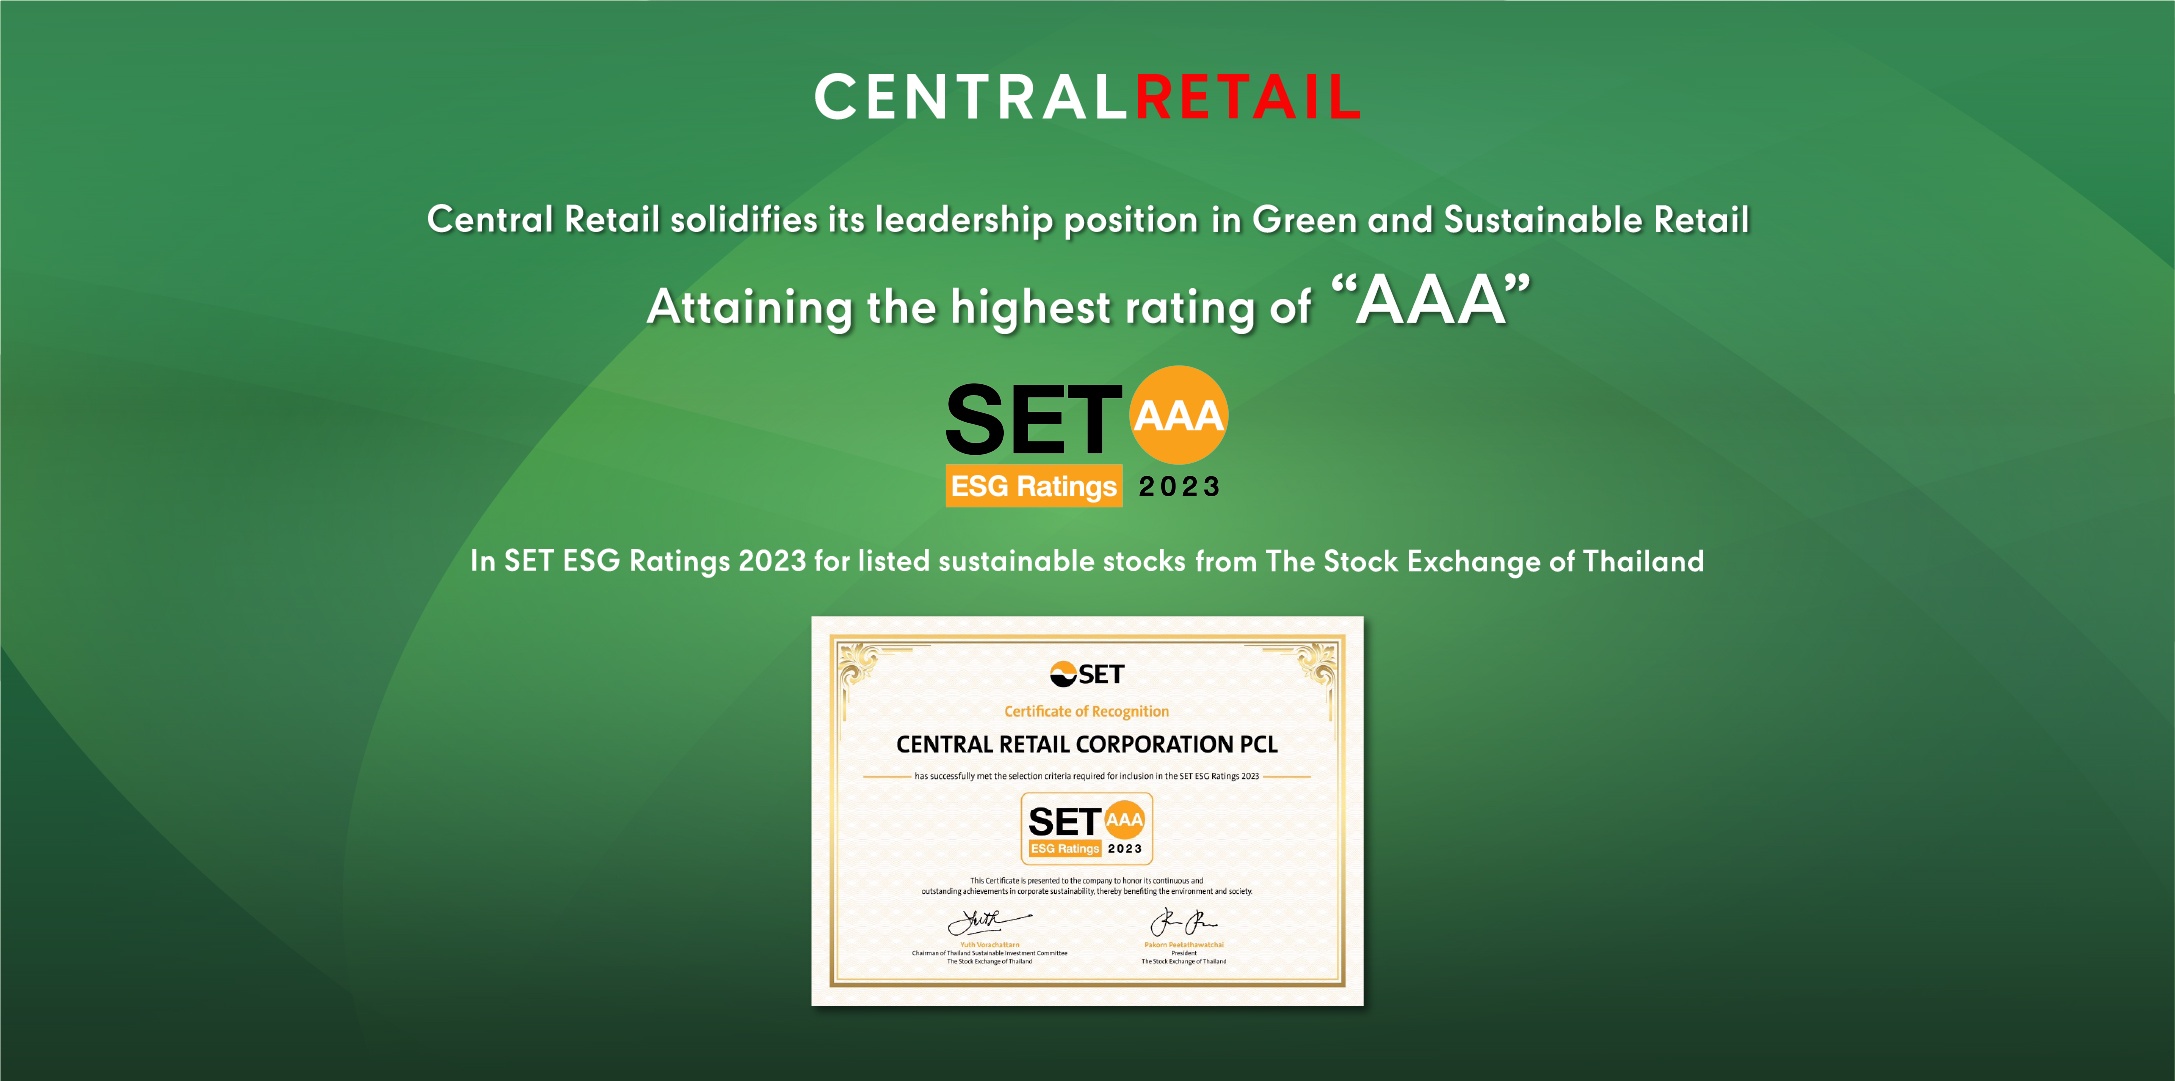 Central Retail attained the highest tier of “AAA” in the SET ESG Ratings 2023